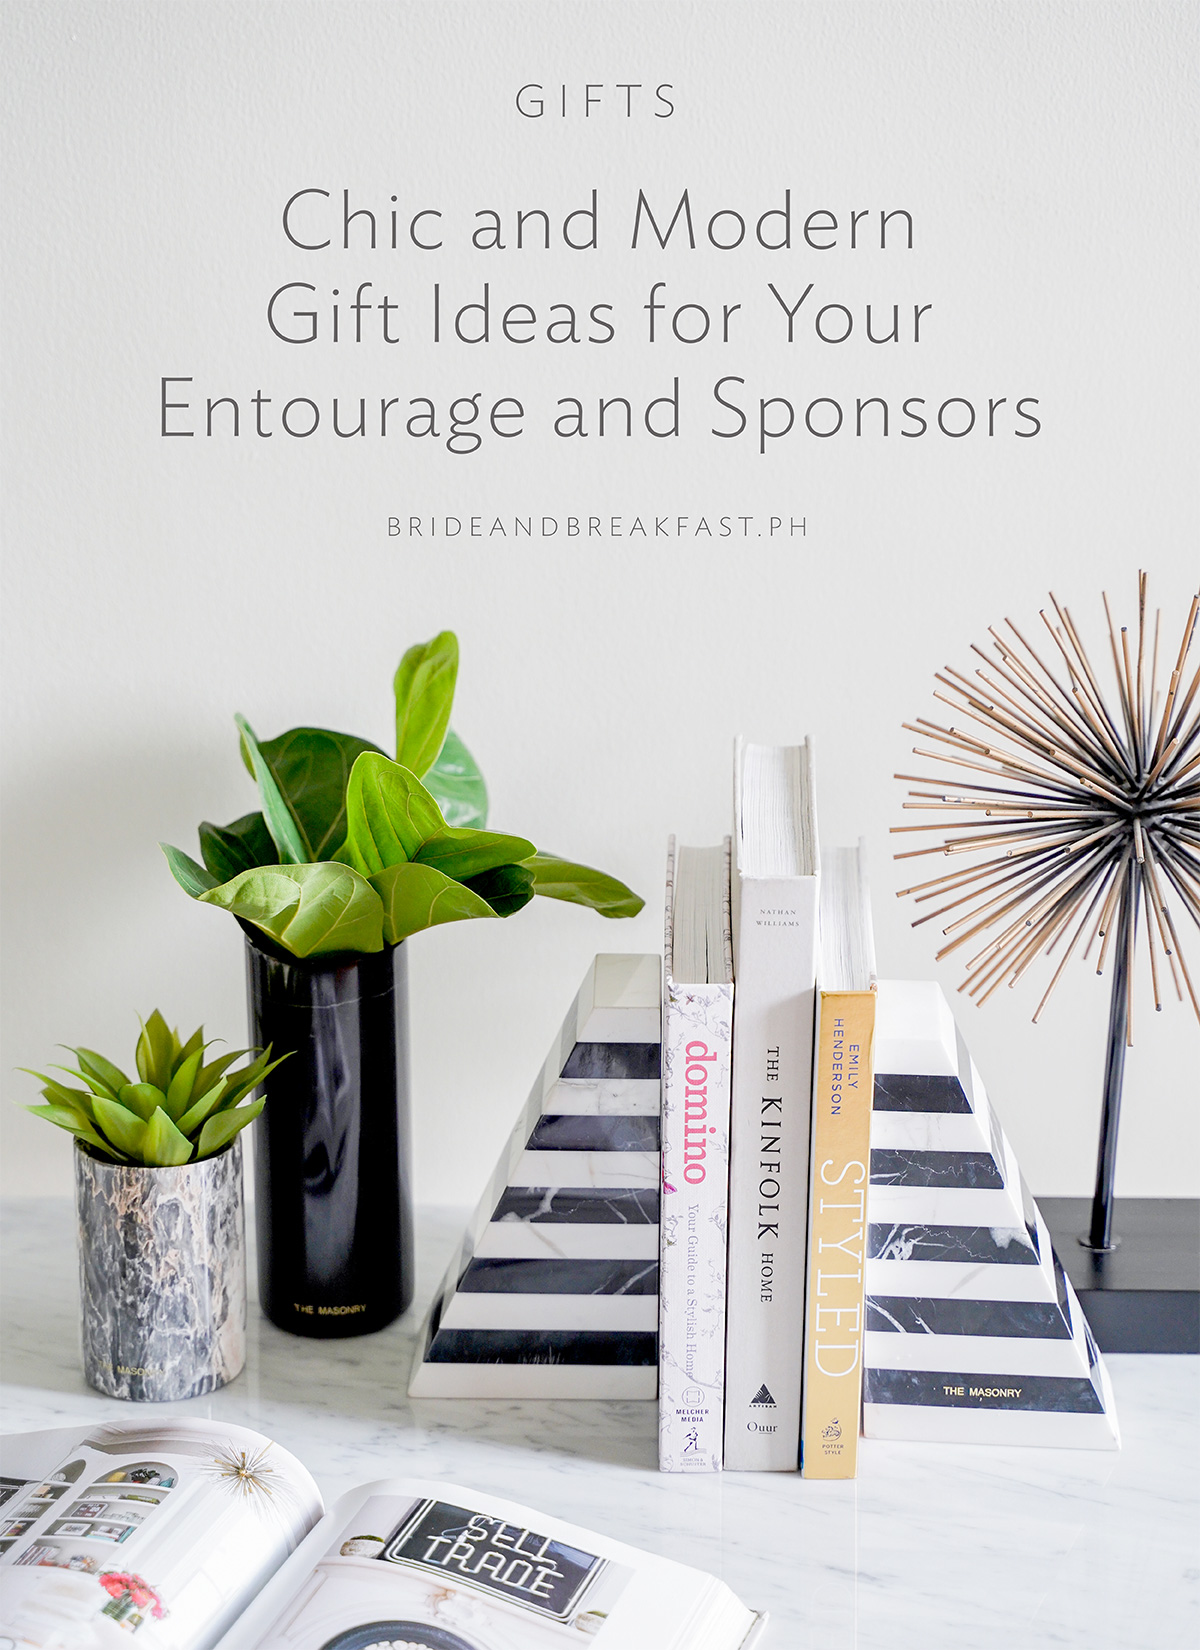 Chic and Modern Gift Ideas for Your Entourage and Sponsors